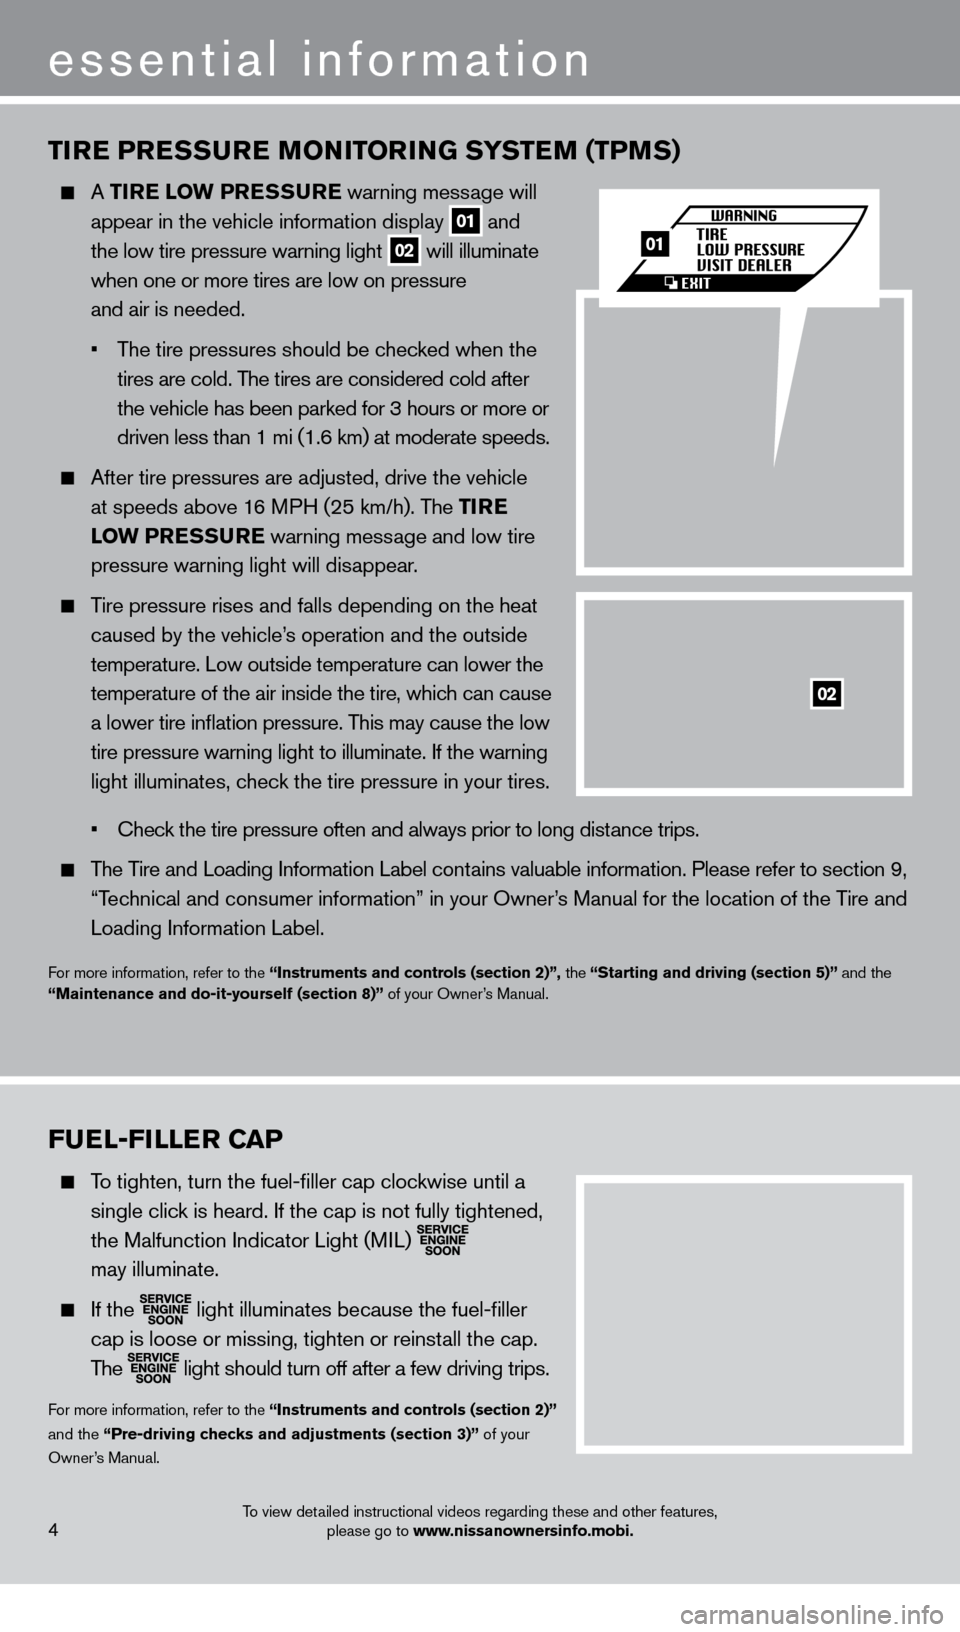 NISSAN GT-R 2014 R35 Quick Reference Guide TIre P reS Su re  MONITO rI NG SYST eM (TPM S)
  A TI re LOw   Pre SSure warning mess age will
 
  appear in the vehicle information display 01 and  
 the low tire pressure warning light 02  will illu